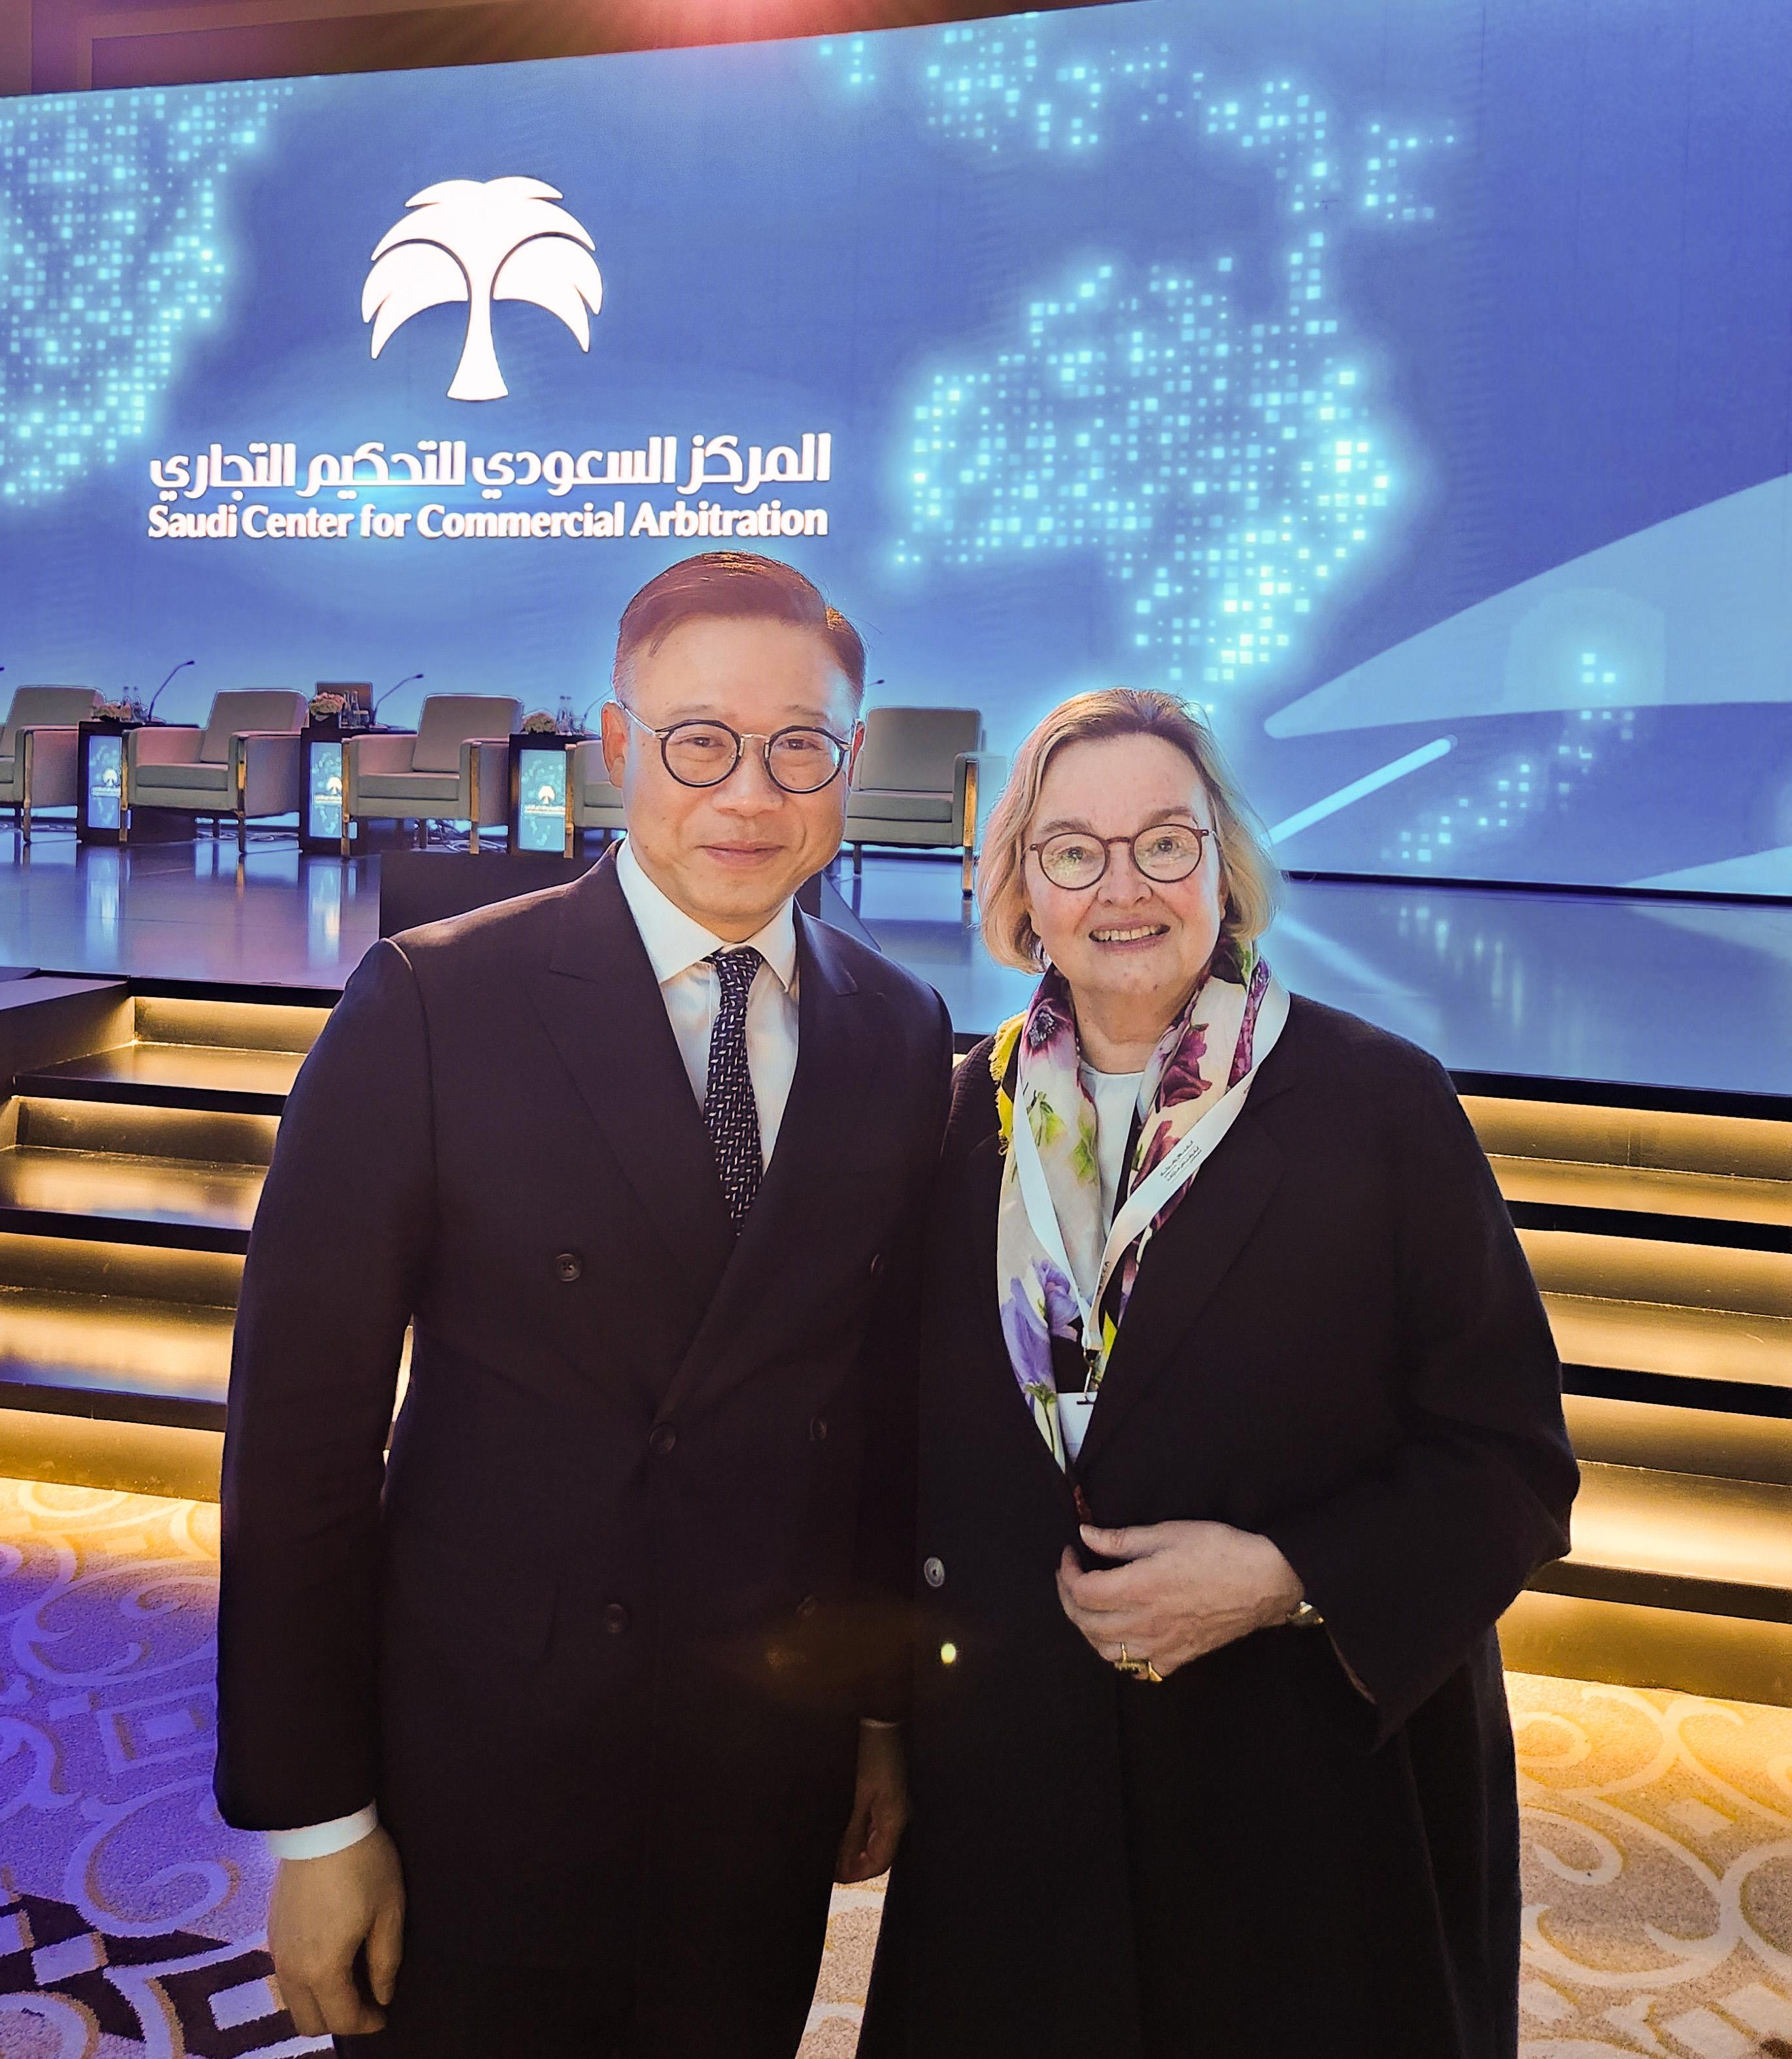 The Deputy Secretary for Justice, Mr Cheung Kwok-kwan (left), meets briefly with the Secretary of the United Nations Commission on International Trade Law, Ms Anna Joubin-Bret (right), to exchange views at the Riyadh International Disputes Week events in Riyadh, Saudi Arabia, on March 6 (Riyadh time).